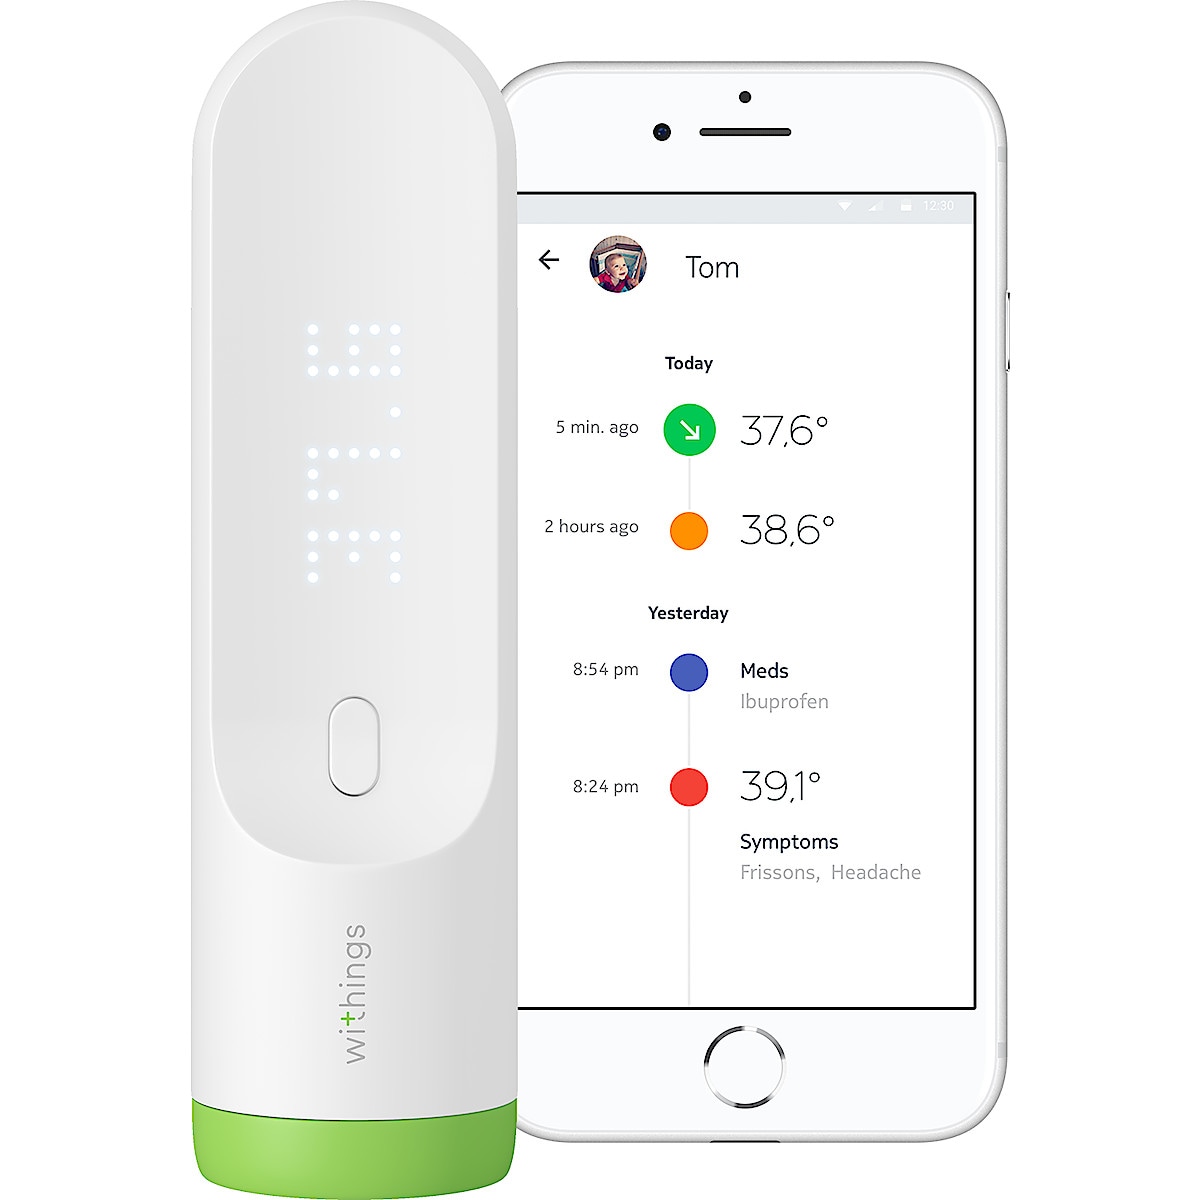 Withings Thermo, febertermometer